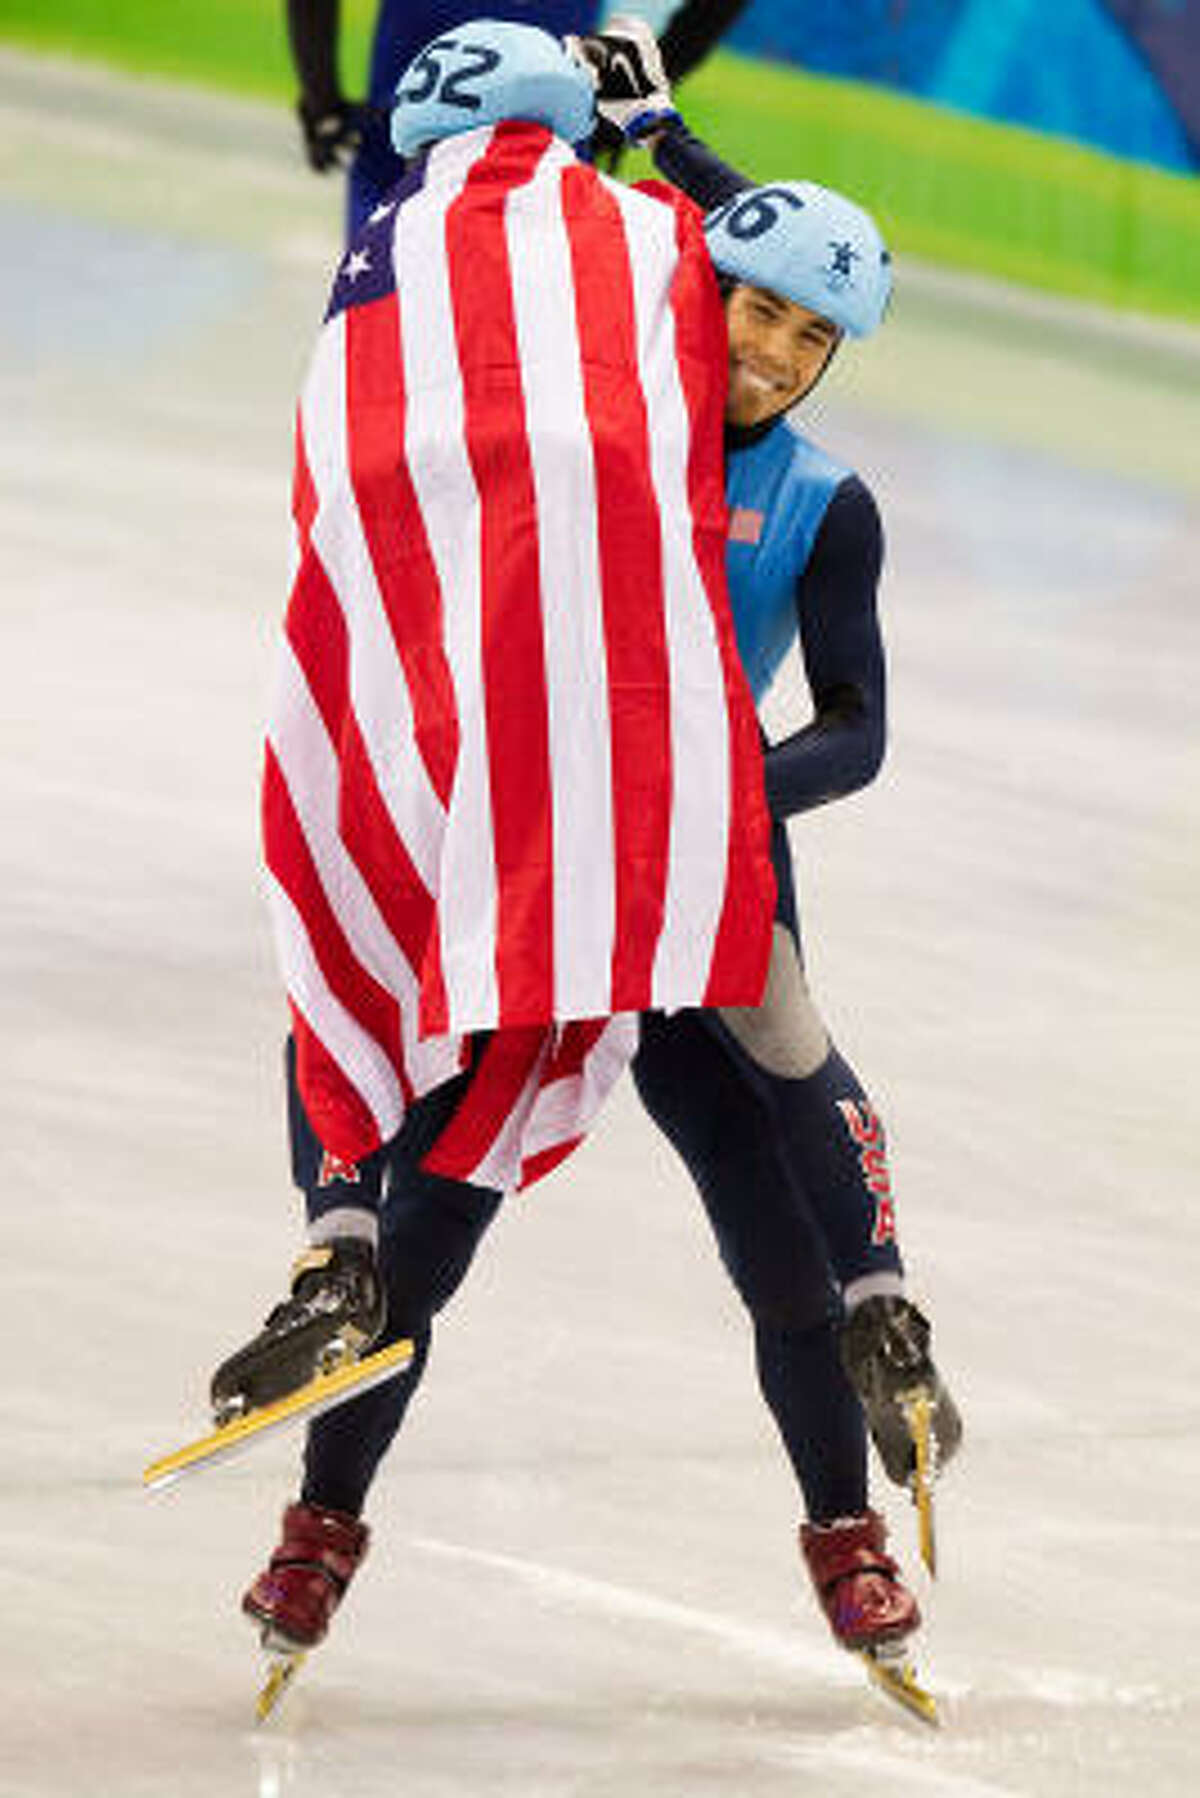 Apolo Anton Ohno lifts up teammate J.R. Celski in celebration after capturing his sixth Olympic medal with a second-place finish in the men's 1500 meters. Celski captured the bronze medal.